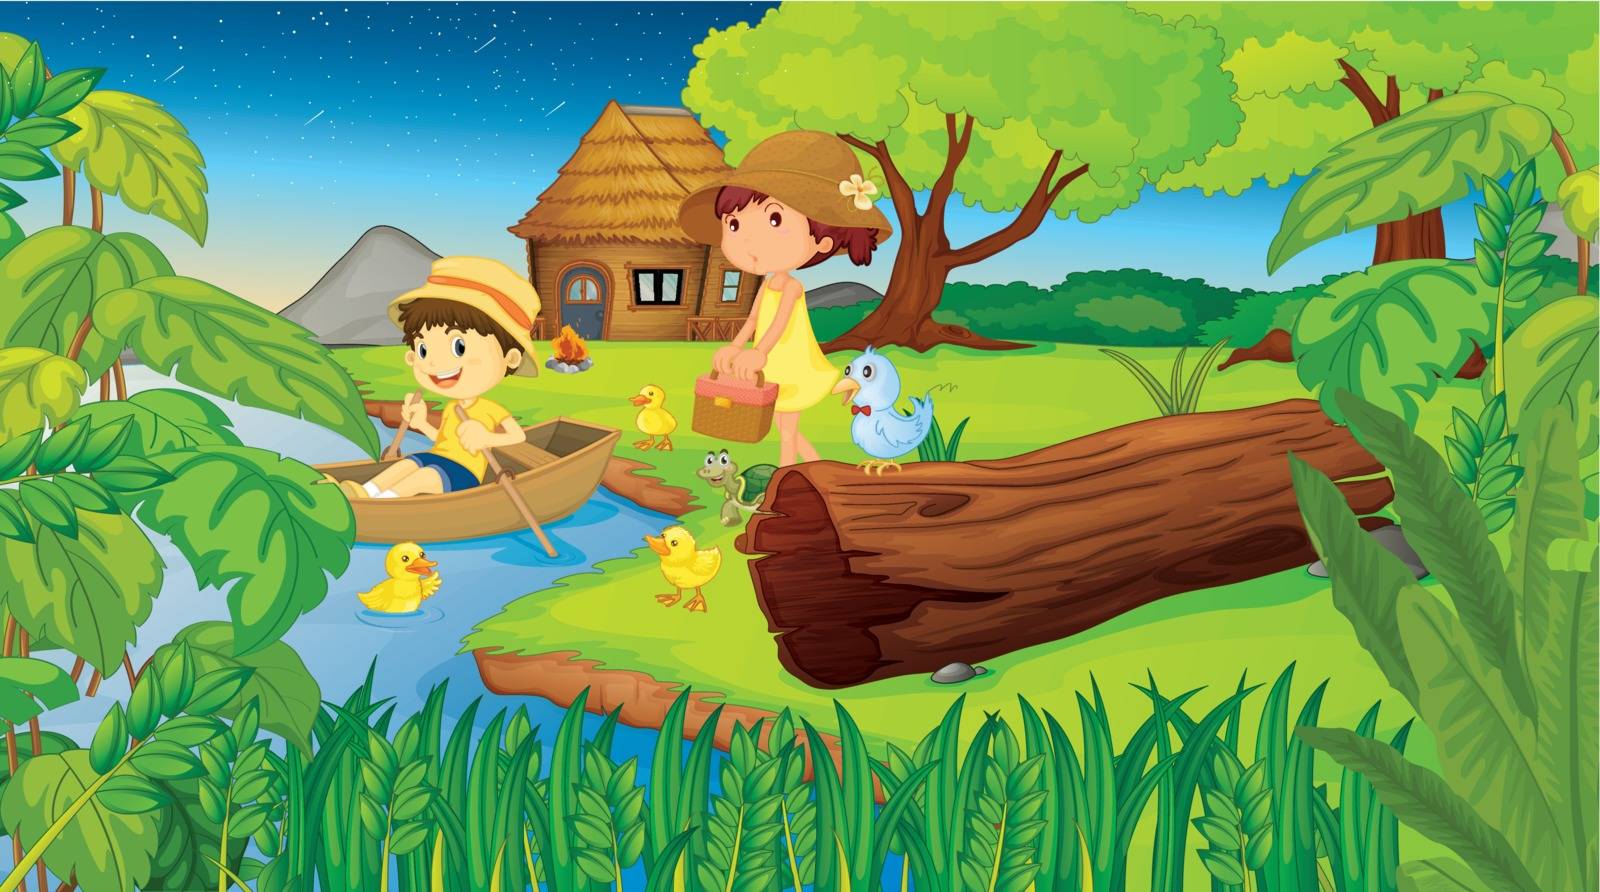 Illustration of 2 children camping in the woods